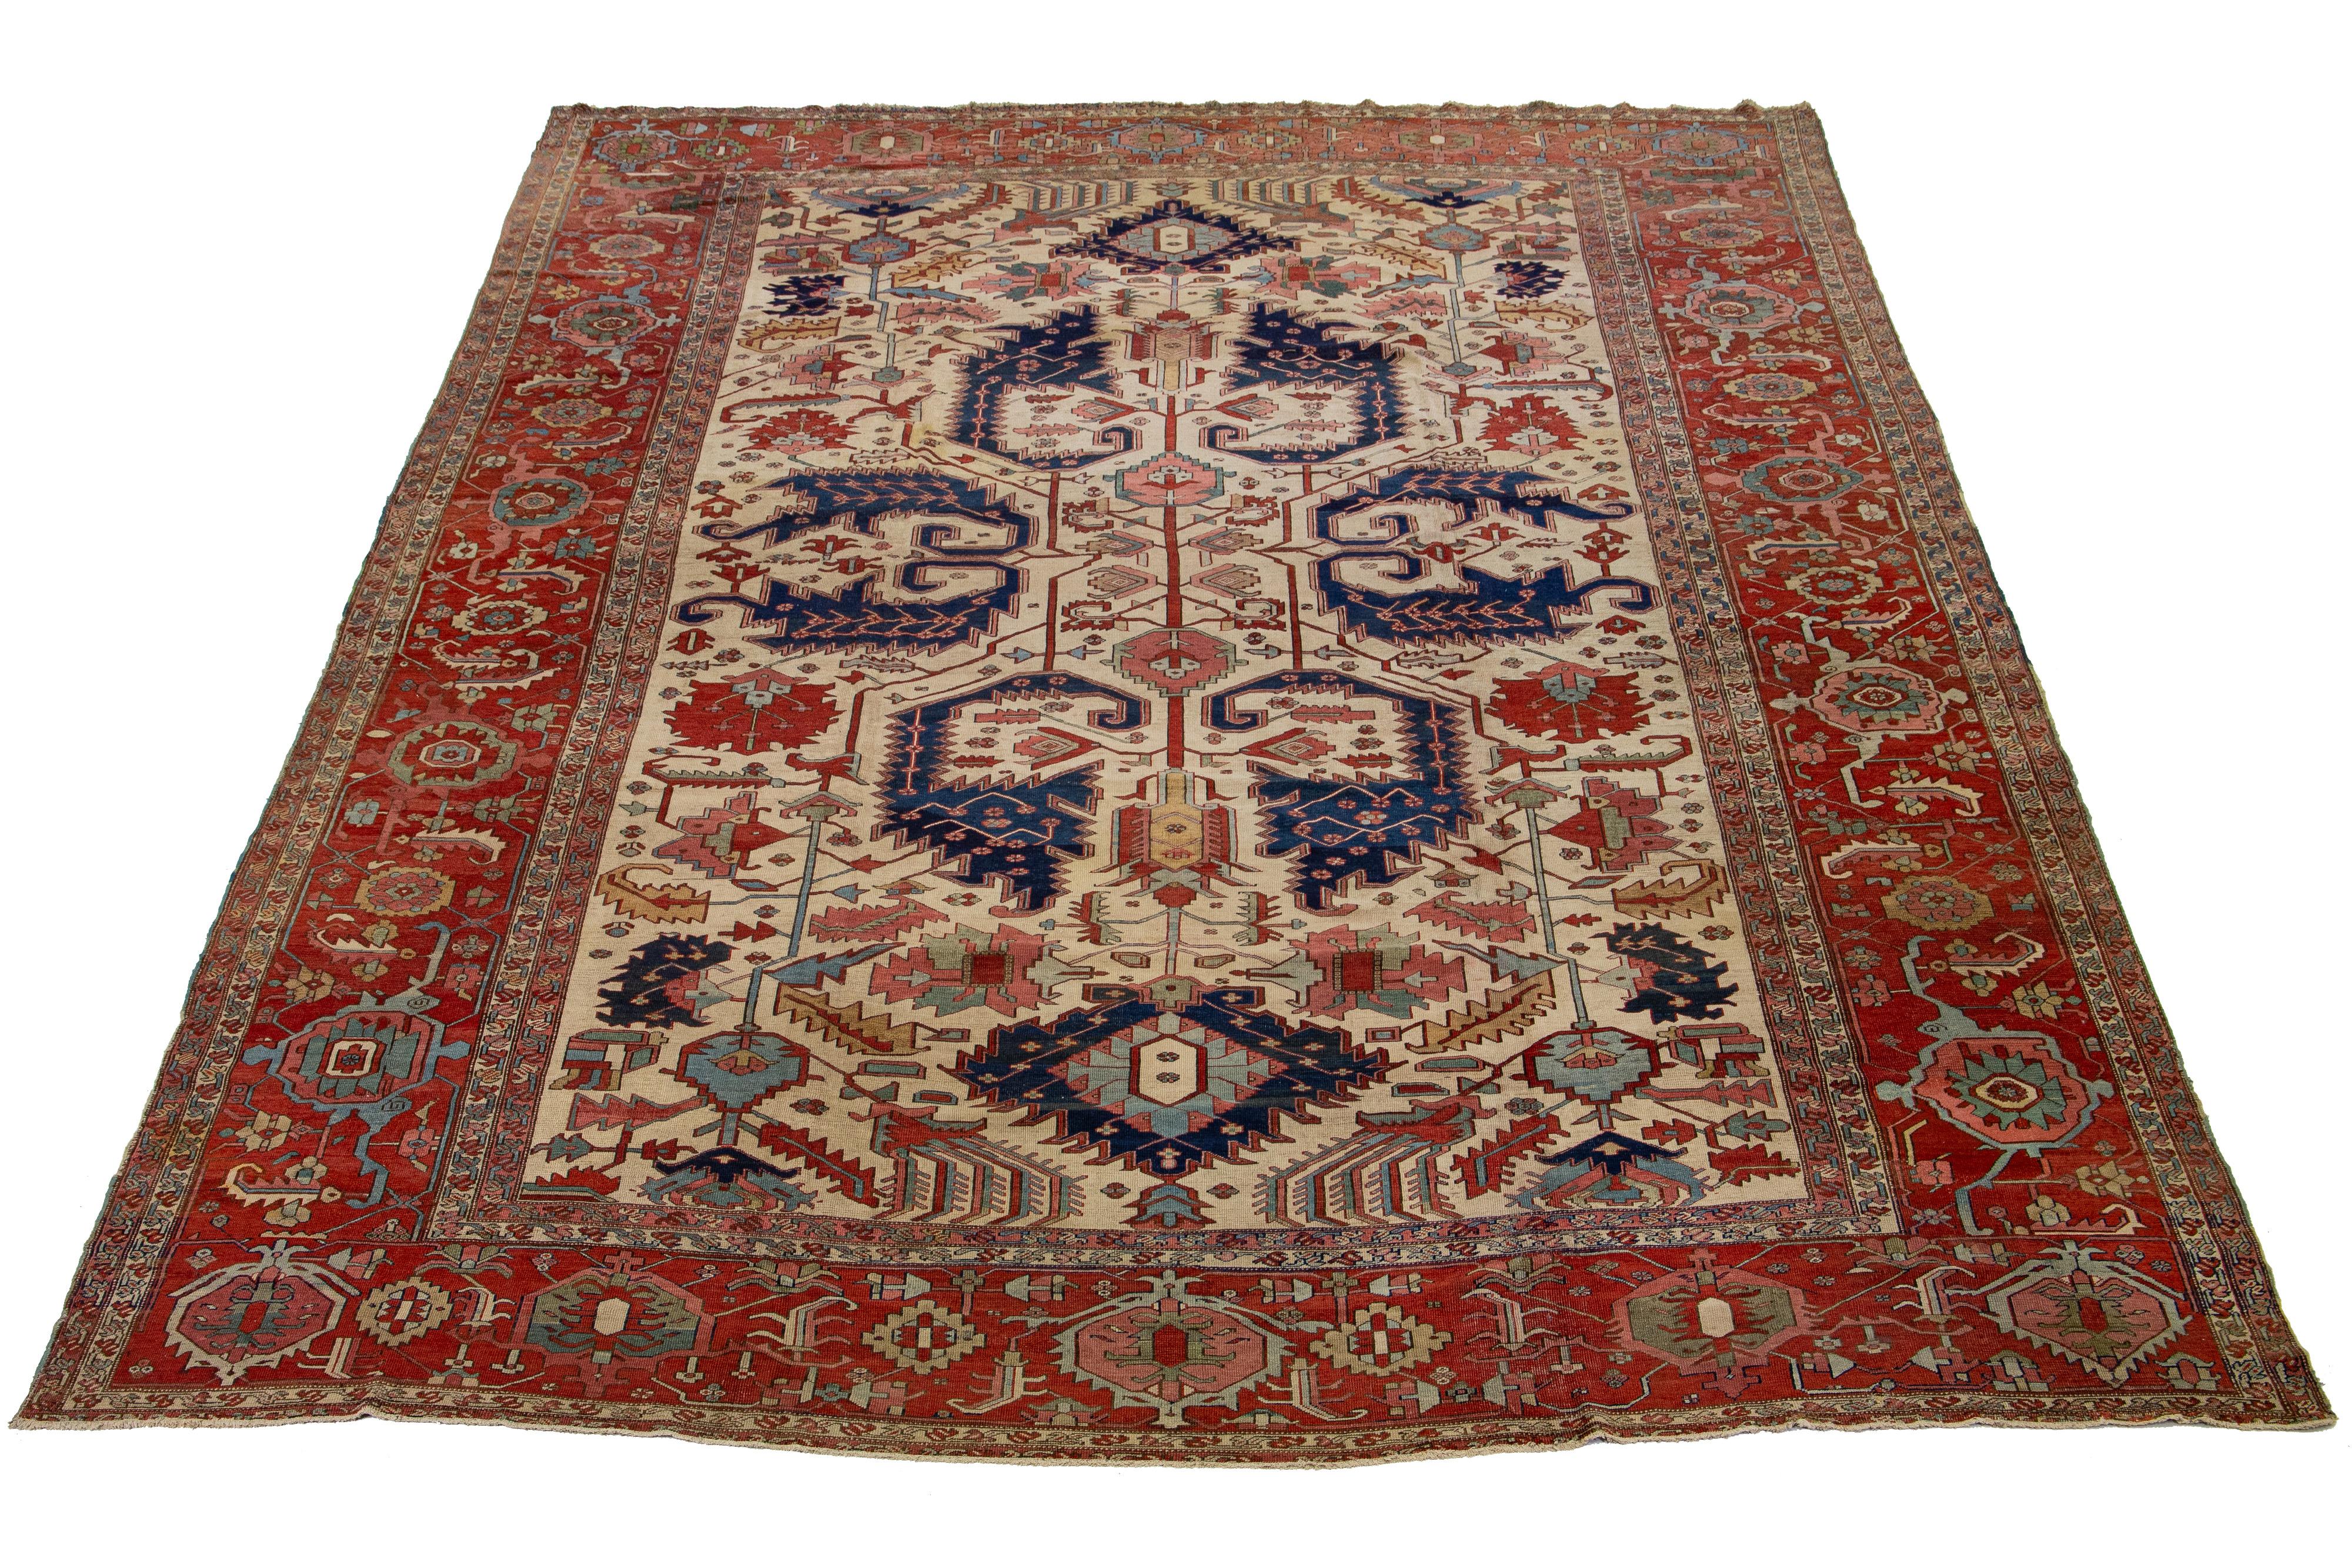 This large antique Persian Serapi rug is crafted from hand-knotted wool. The color field is a beige-tan shade that displays a captivating floral pattern embellished with various shades of color.

This rug measures 13'3